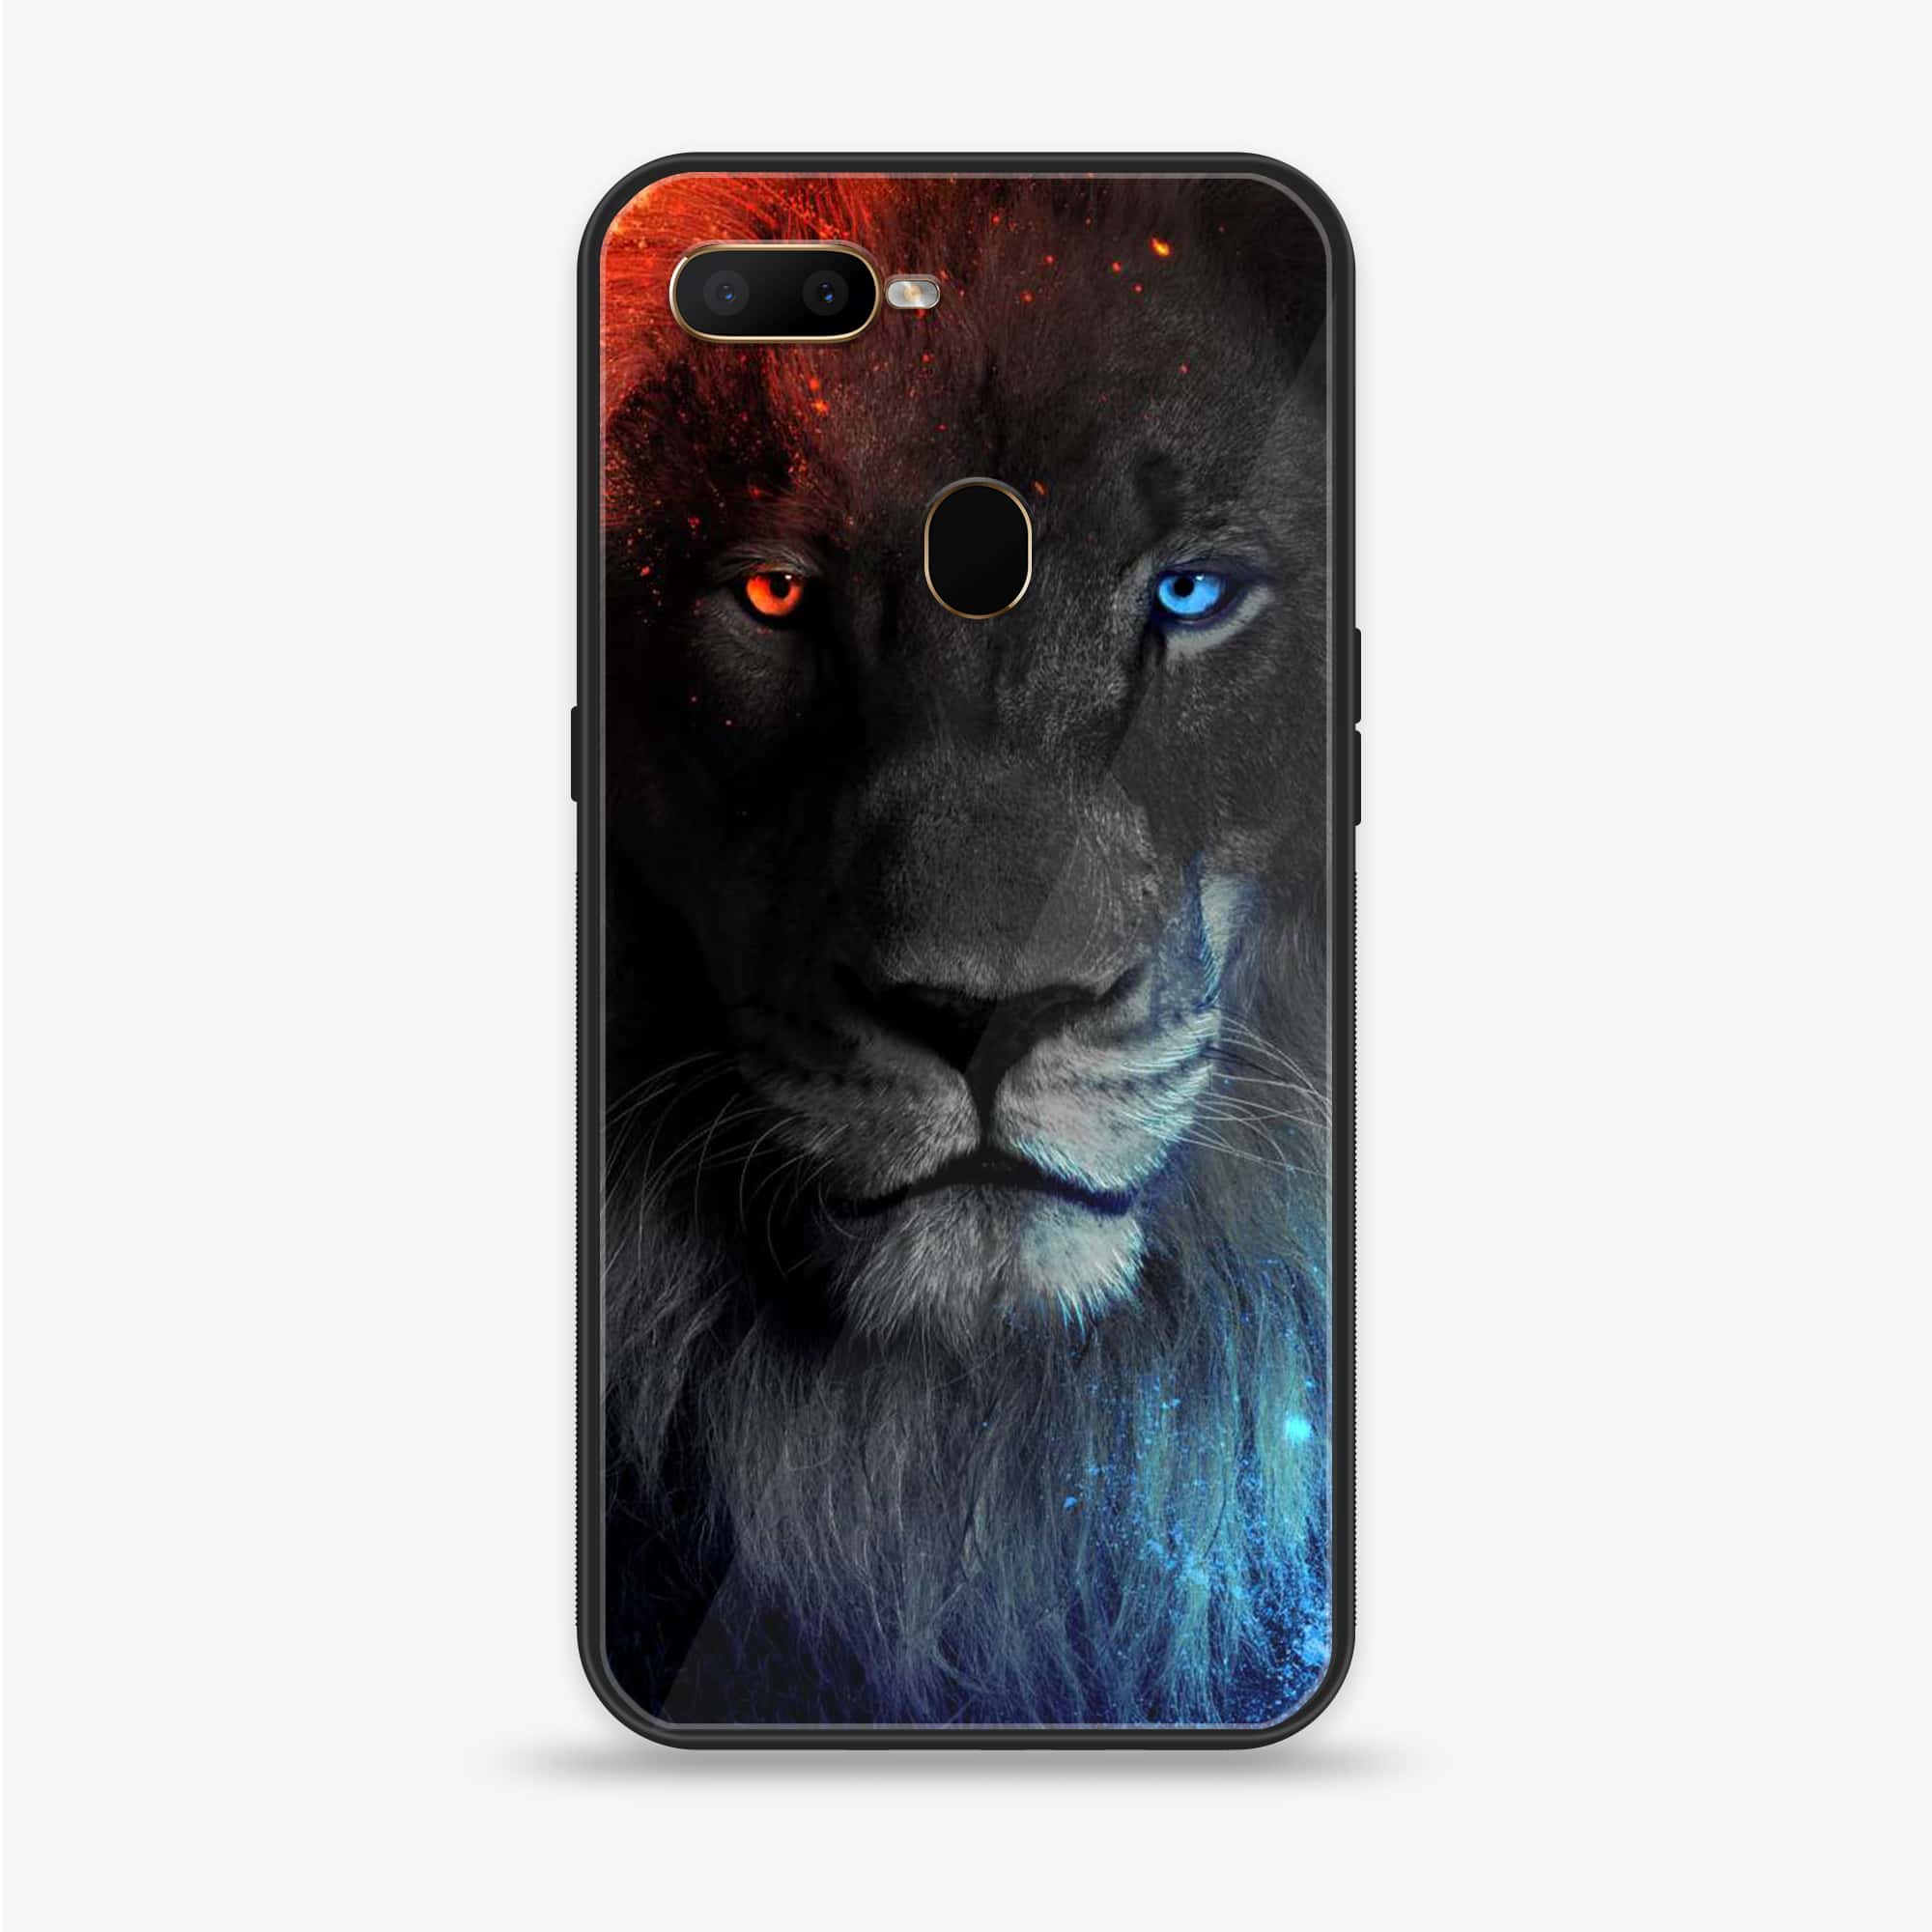 OPPO A5s - Tiger Series - Premium Printed Glass soft Bumper shock Proof Case